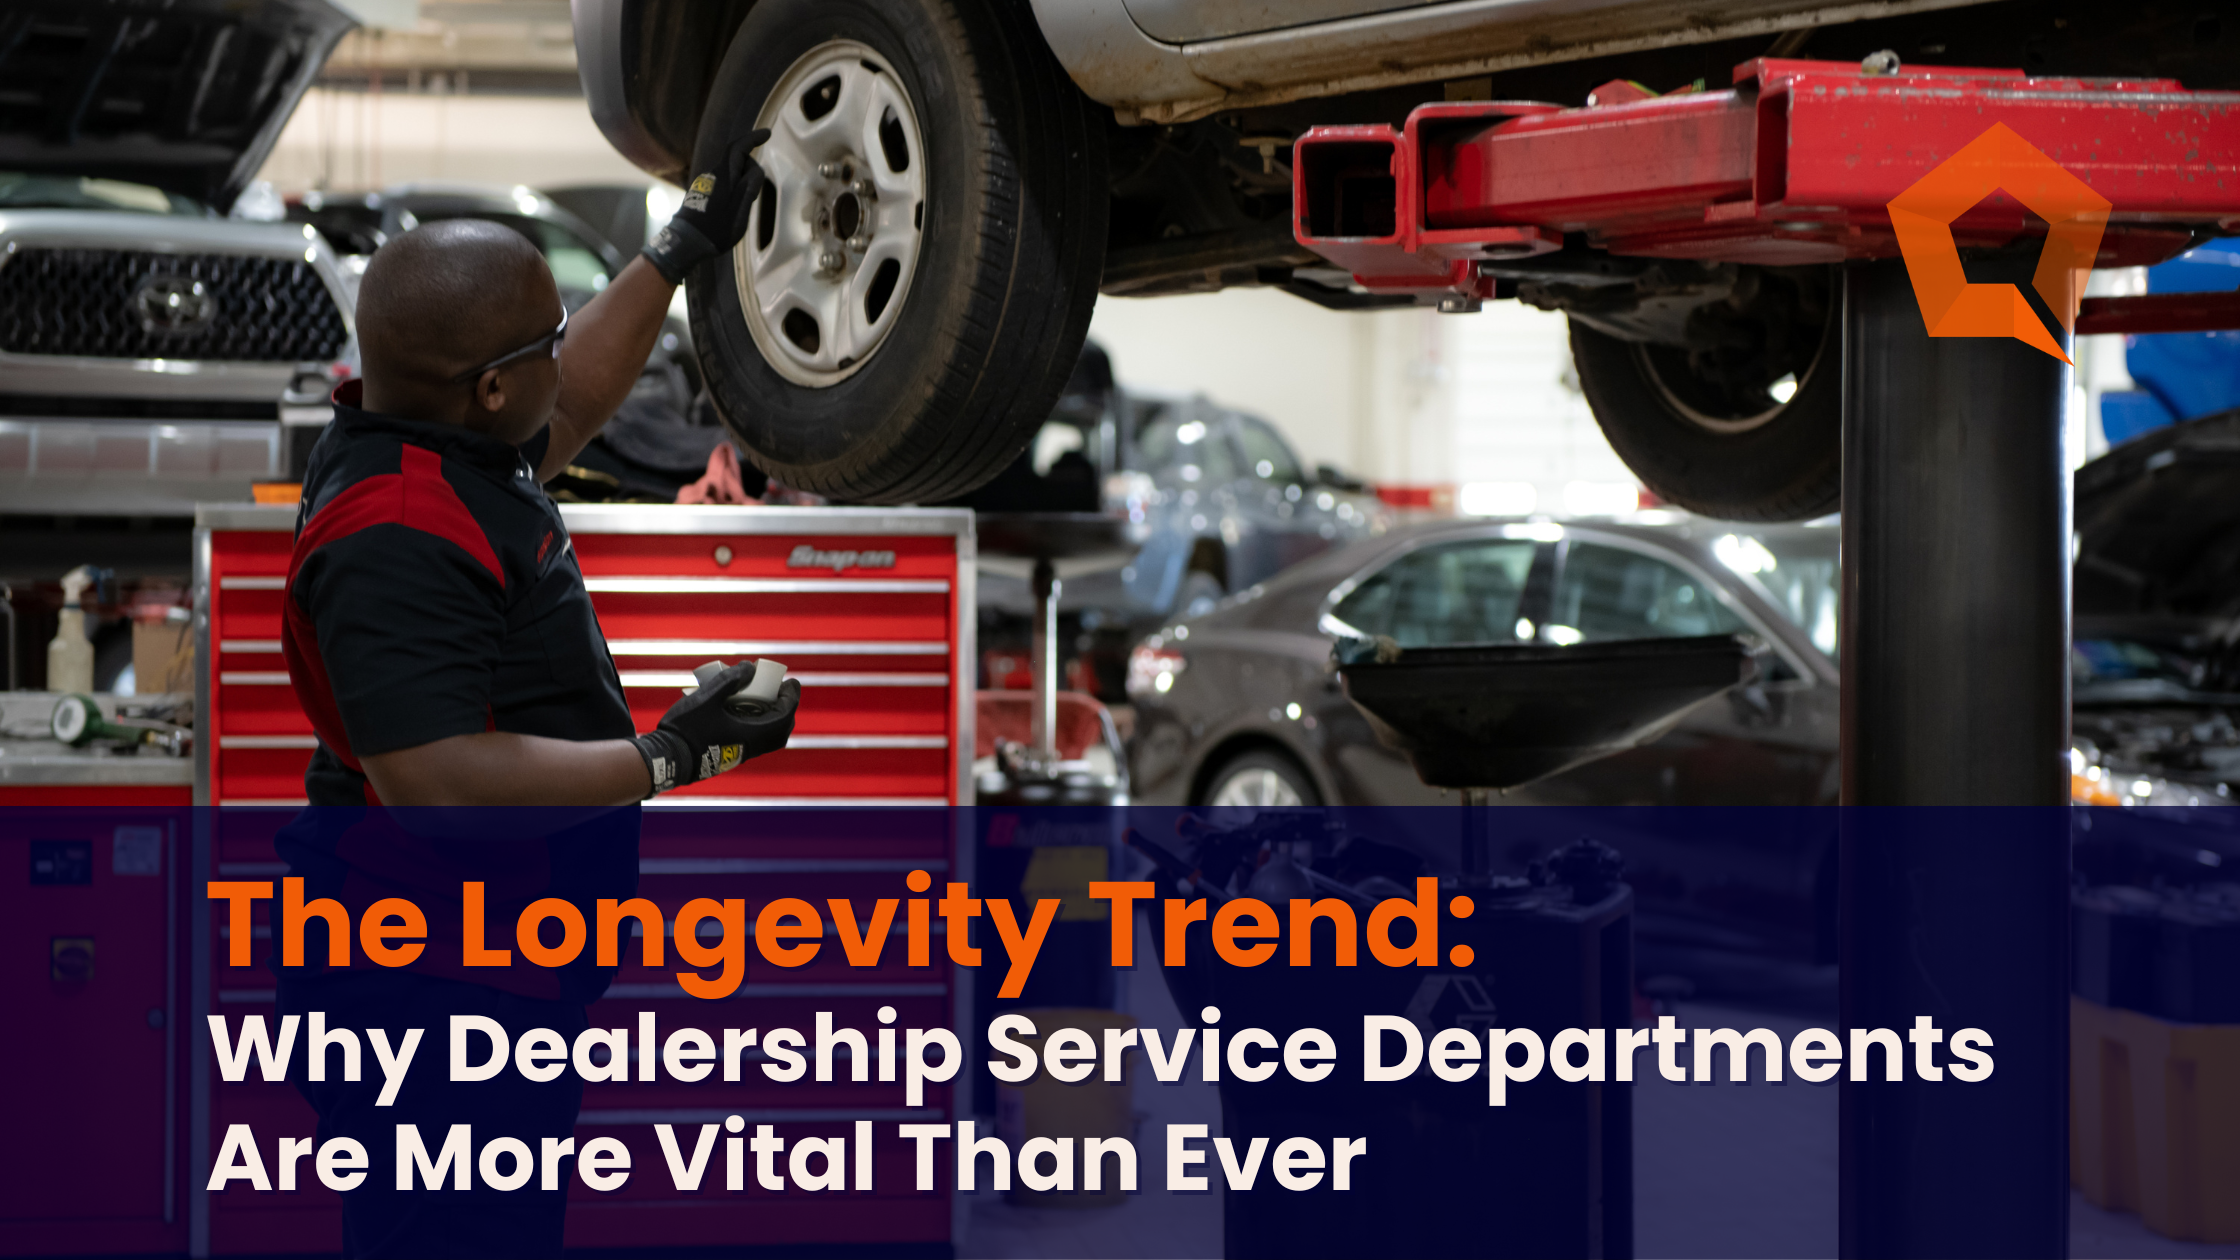 Vehicle Service Departments Are More Vital Than Ever